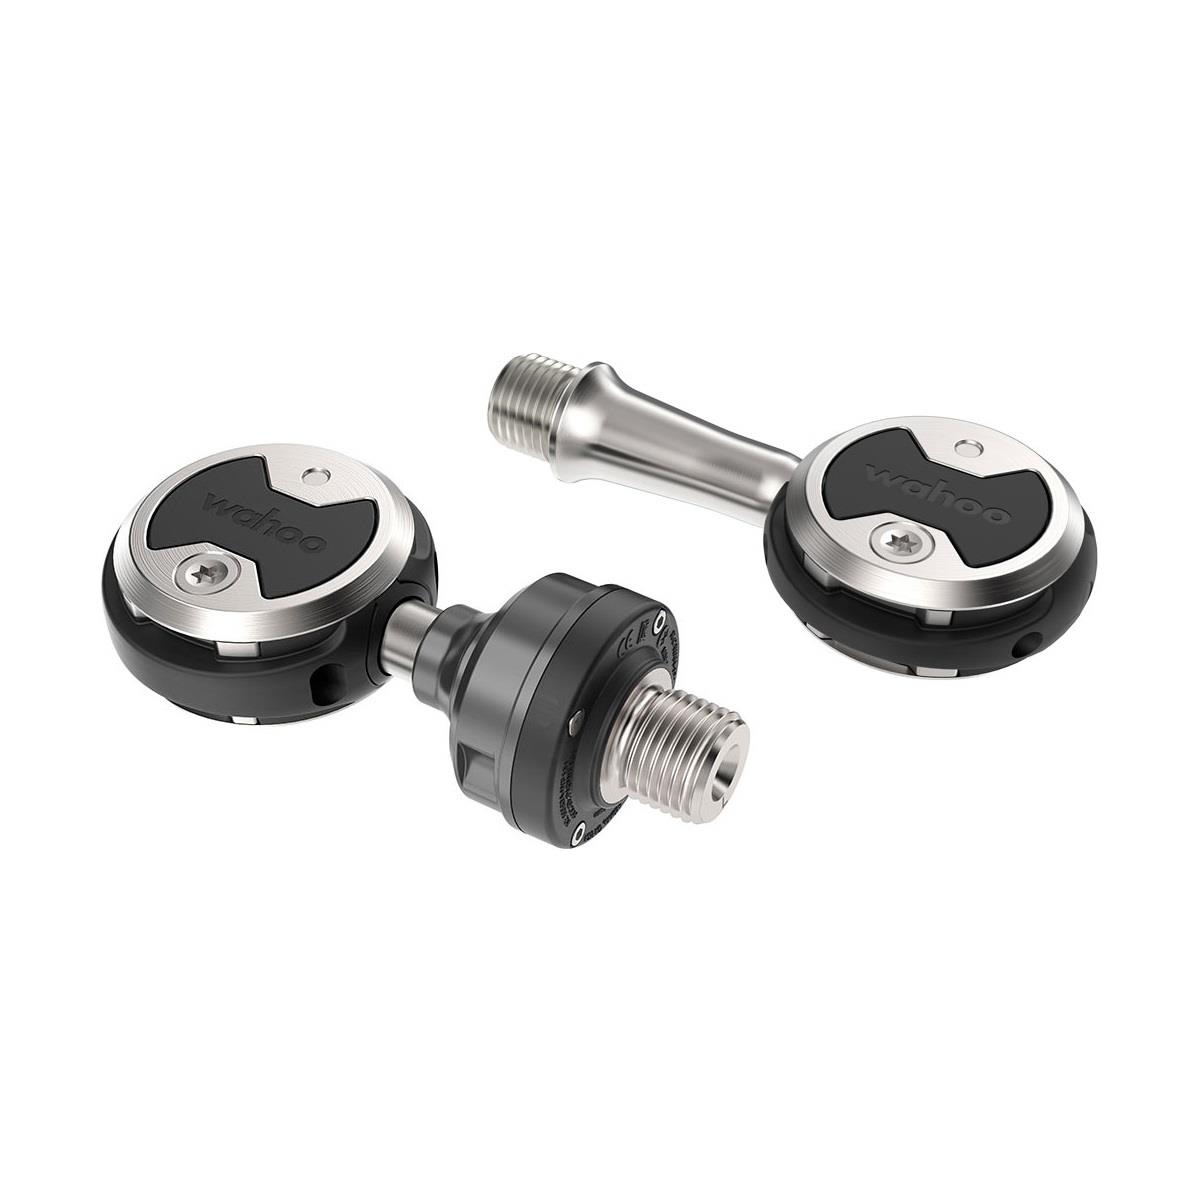 Powrlink Zero Left Sided Power Pedals